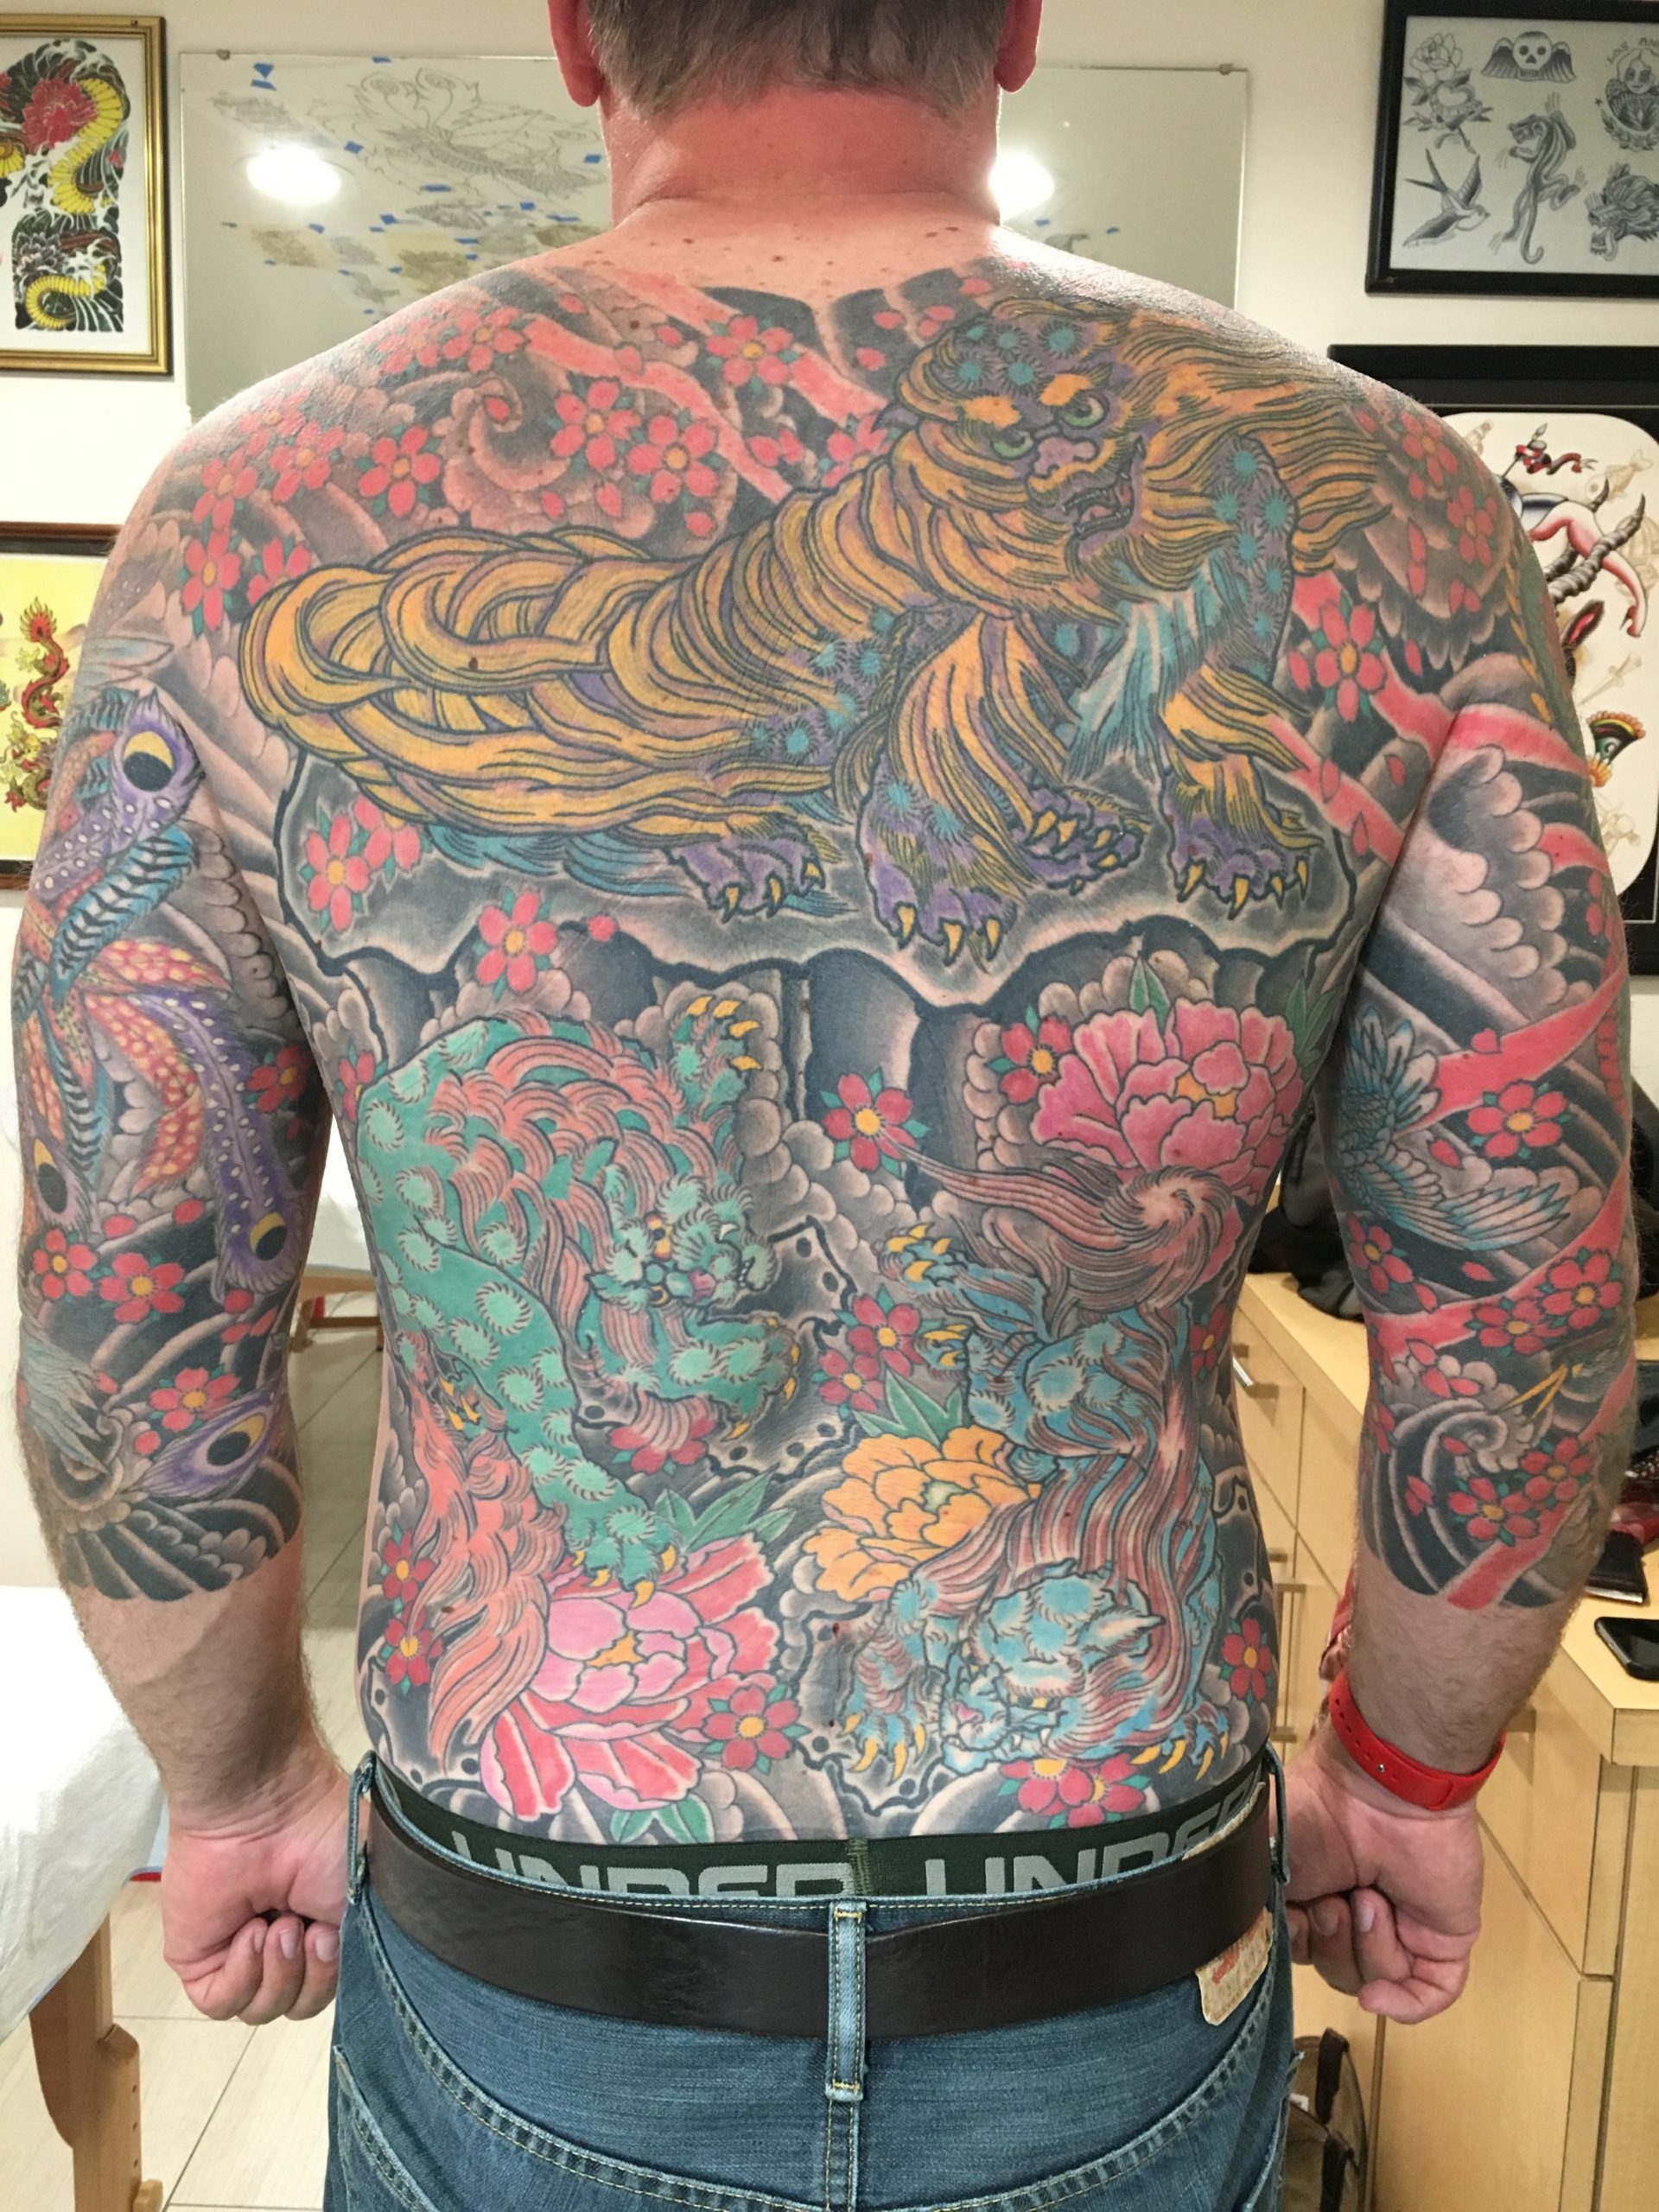 Showing off a custom irezumi my friend made for me a while back